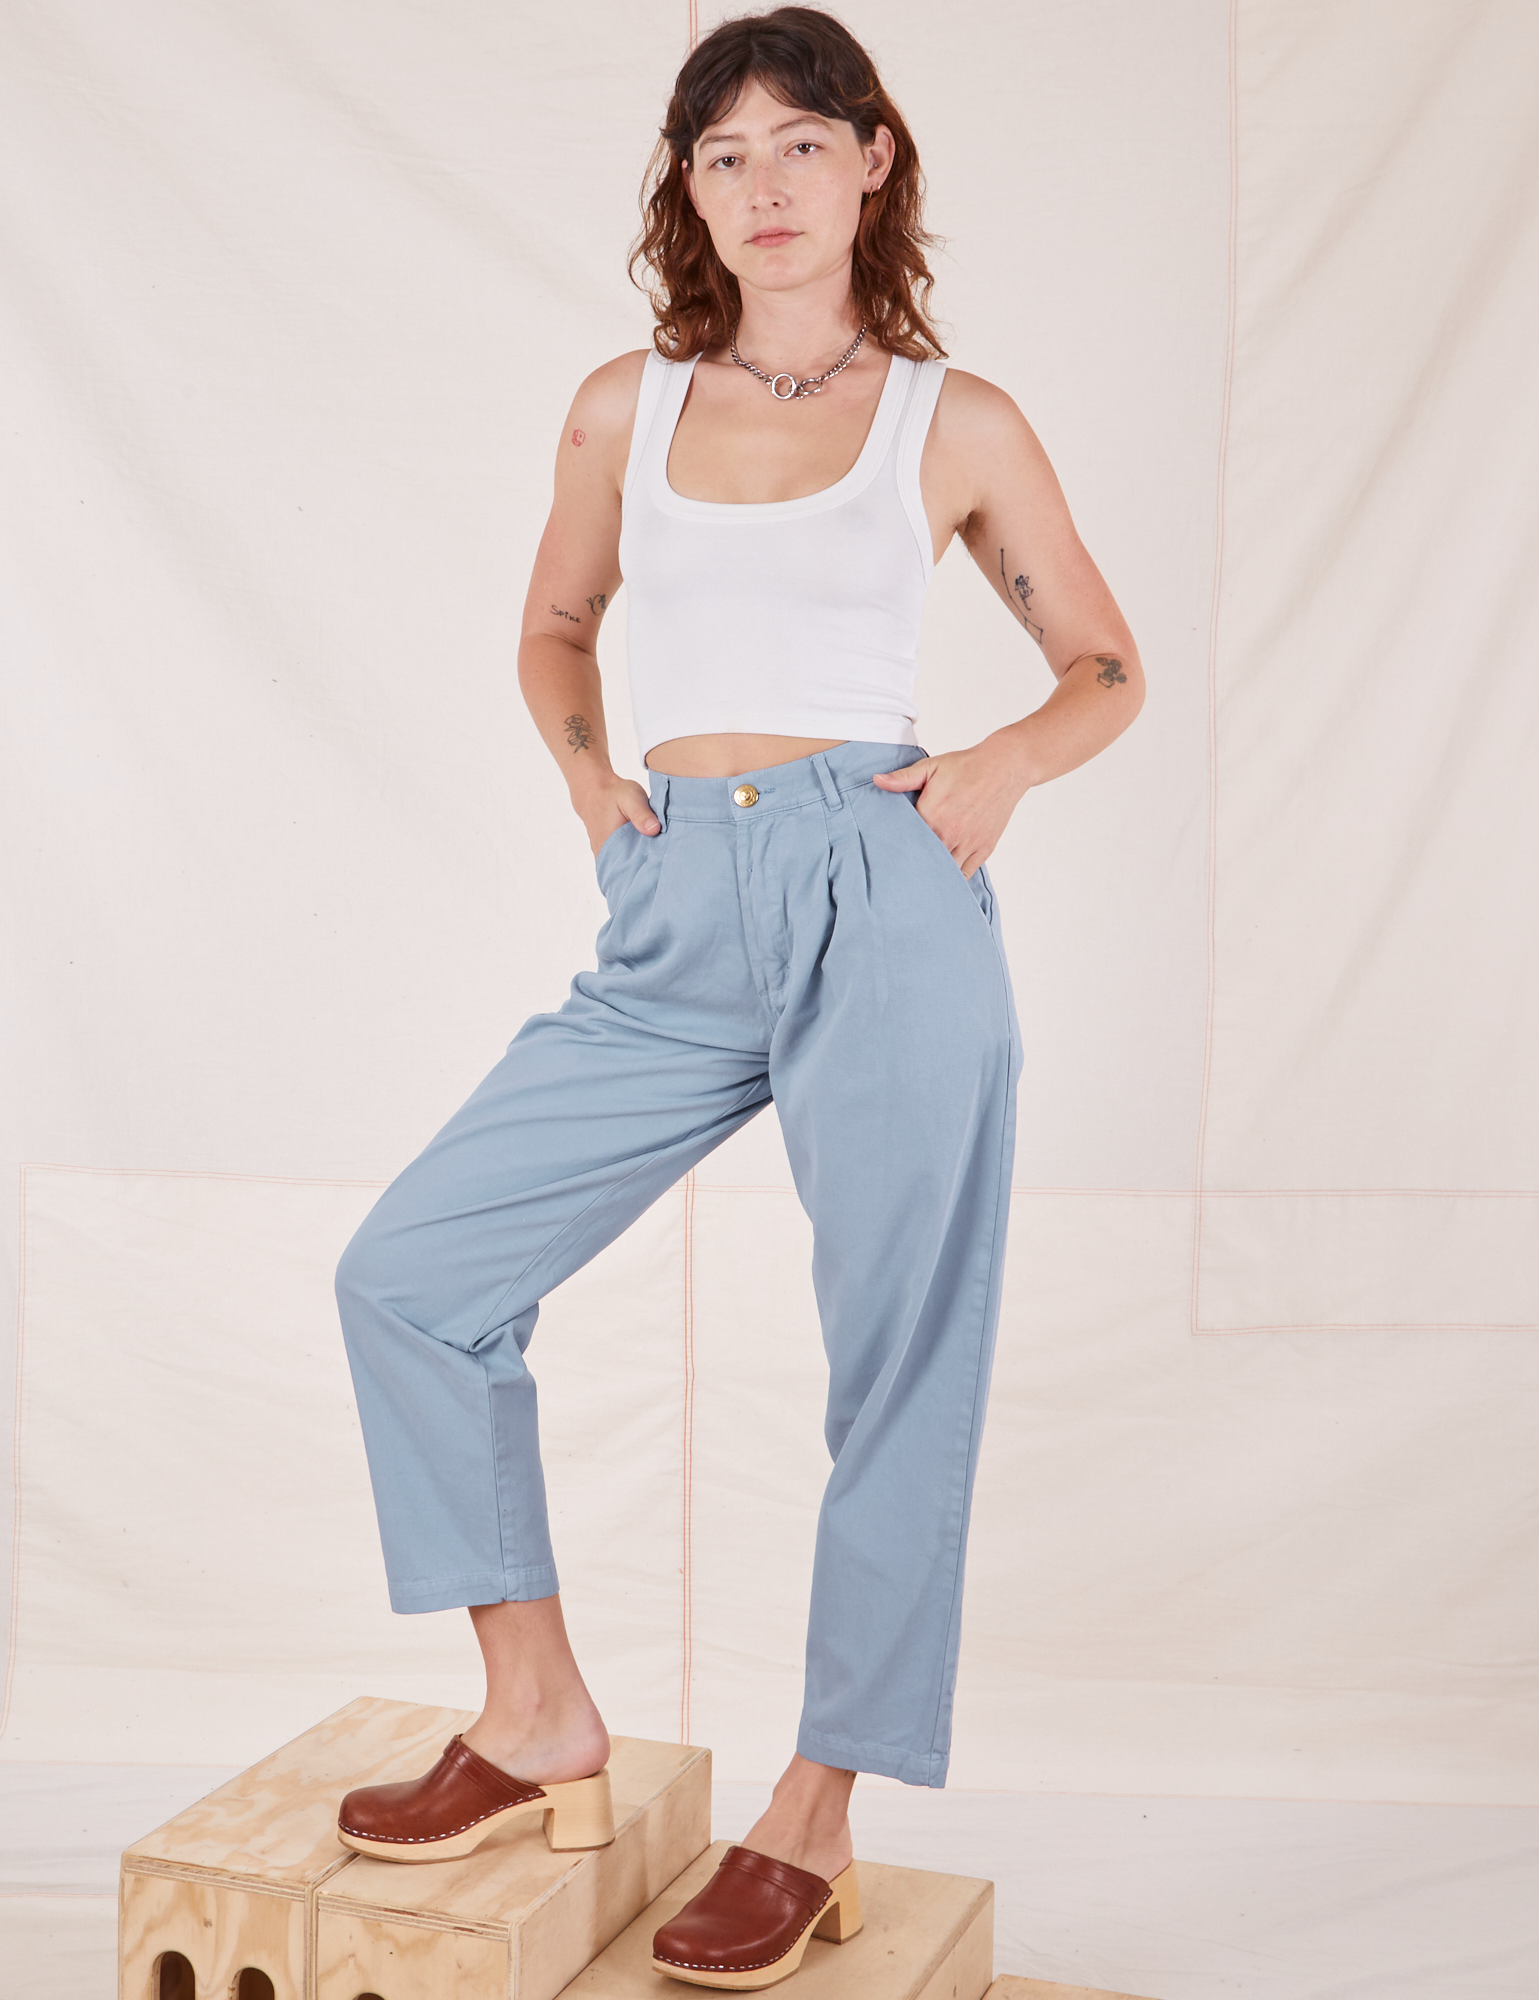 Alex is 5&#39;8&quot; and wearing XXS Heavyweight Trousers in Periwinkle paired with vintage off-white Cropped Tank Top